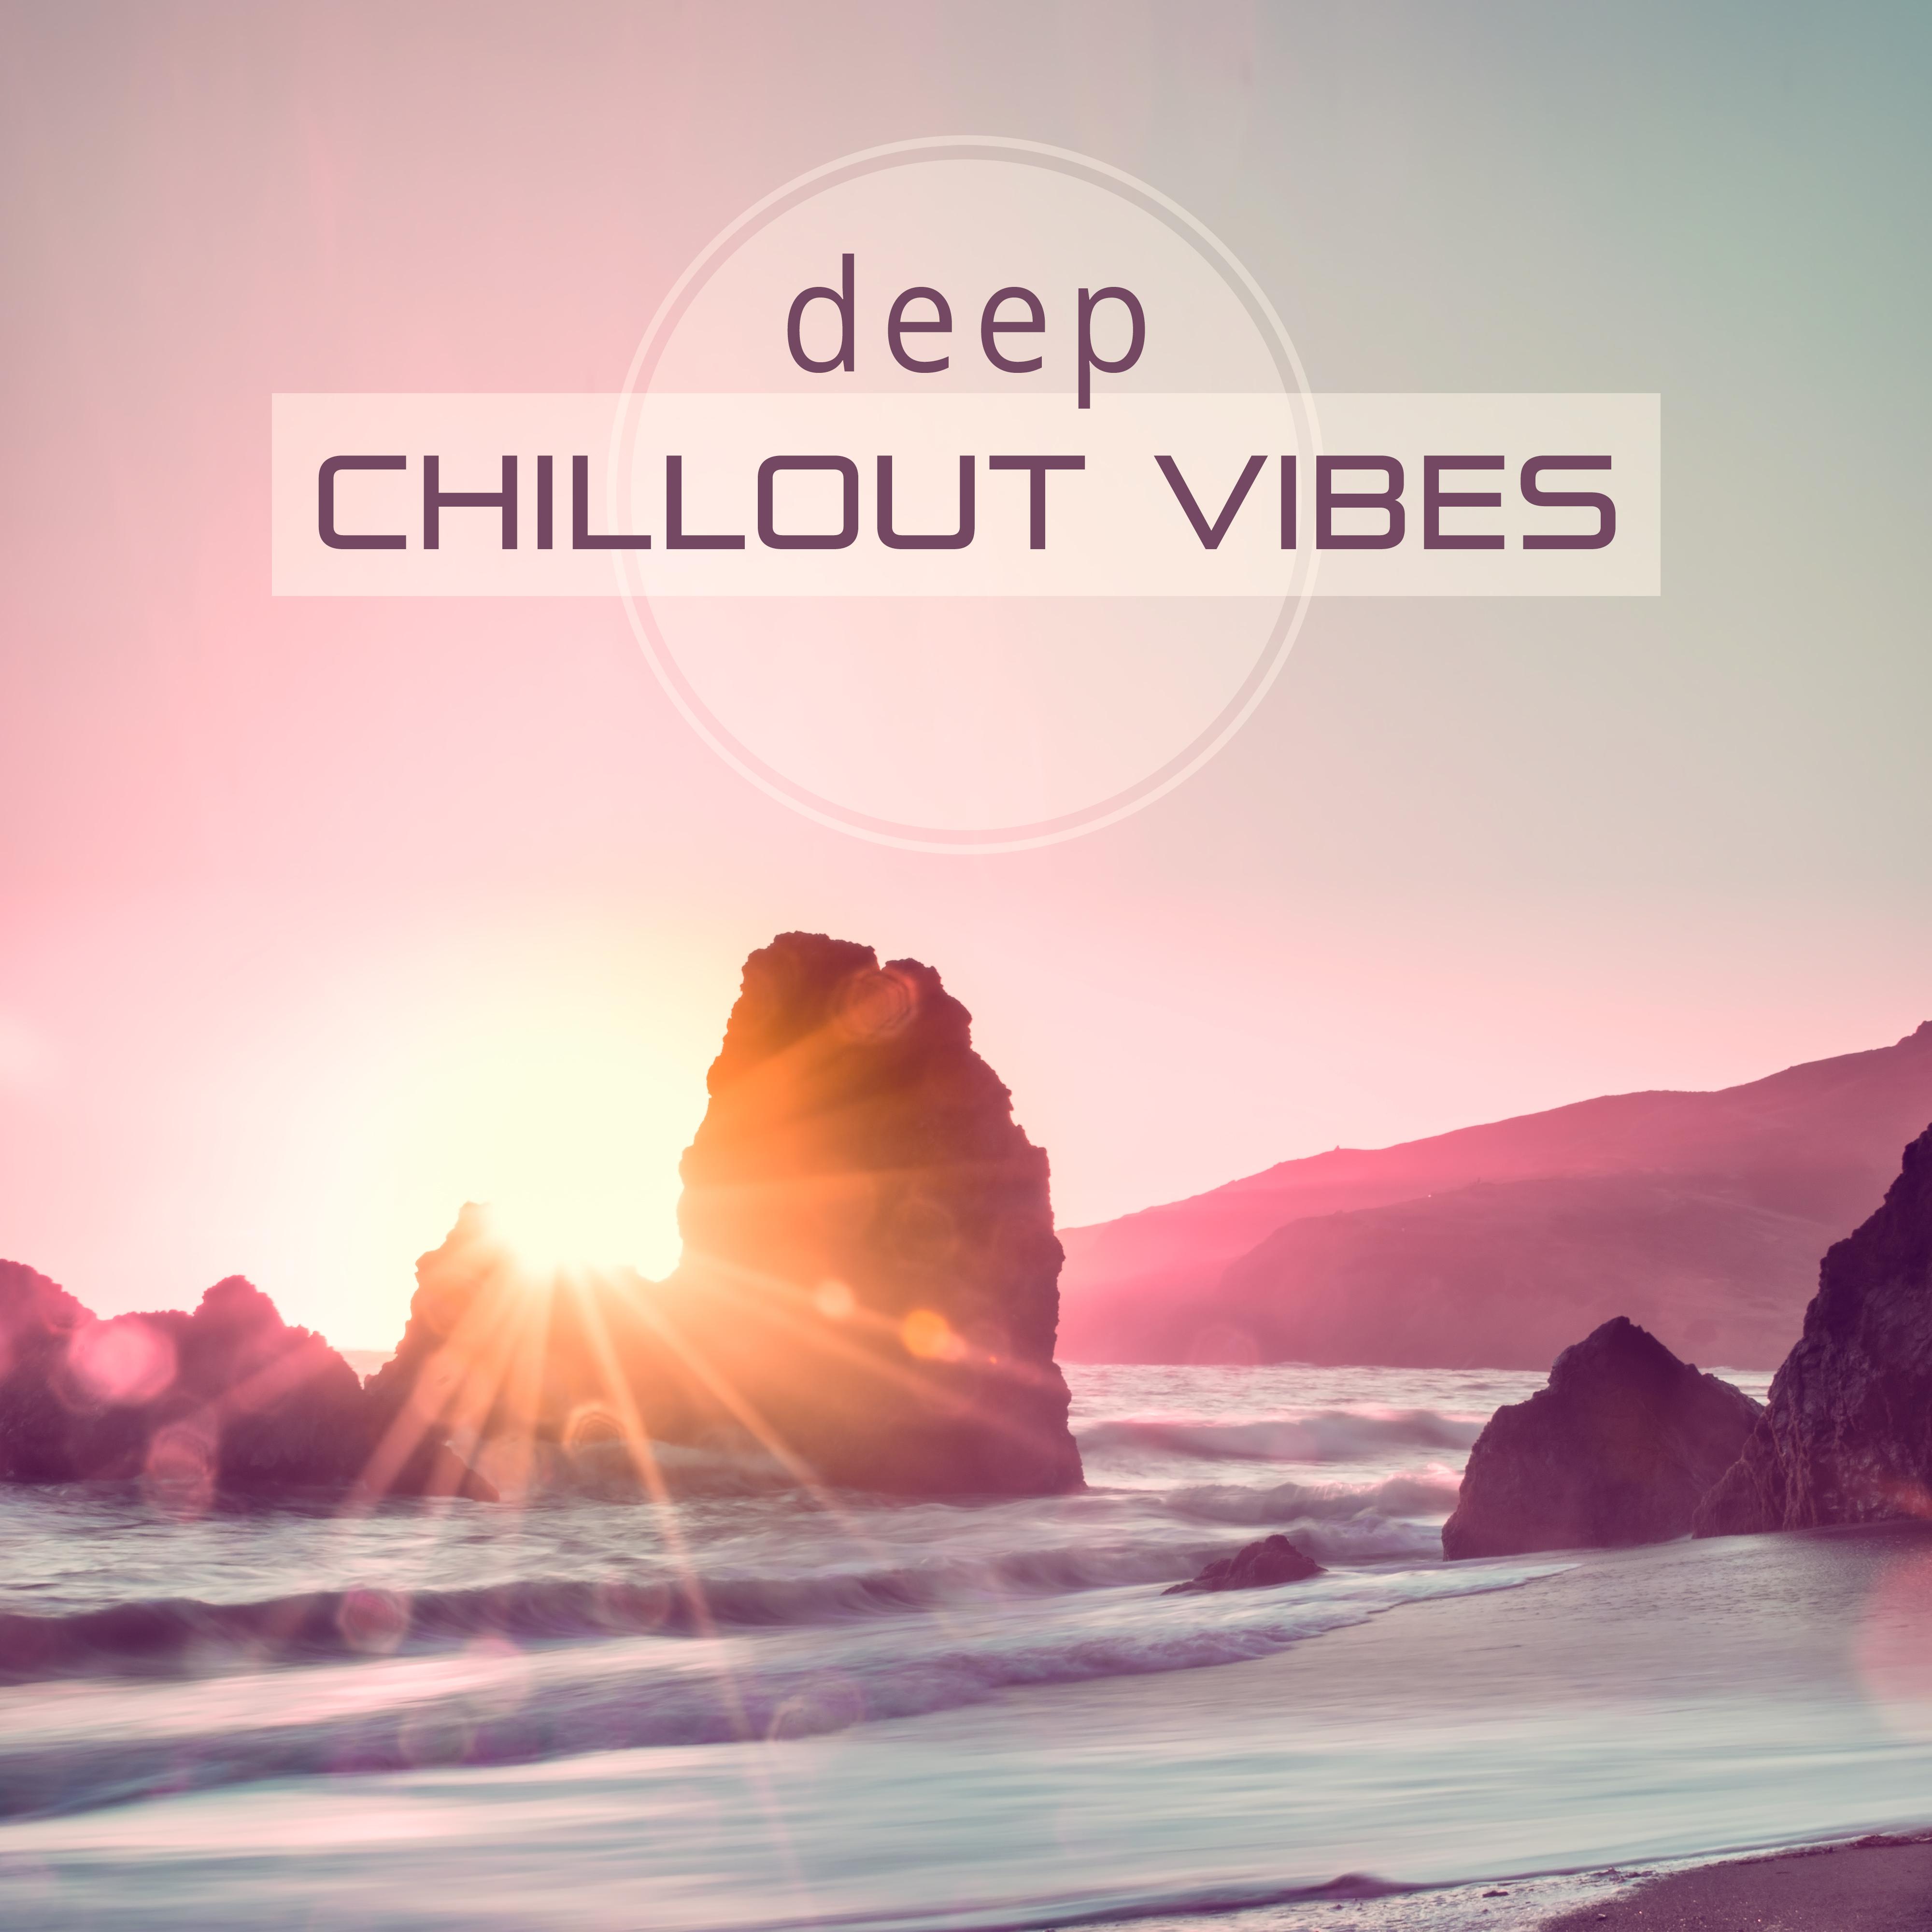 Deep Chillout Vibes – Beautiful Chillout Music, Soft Sounds, Relaxation Music, Calm & Chill